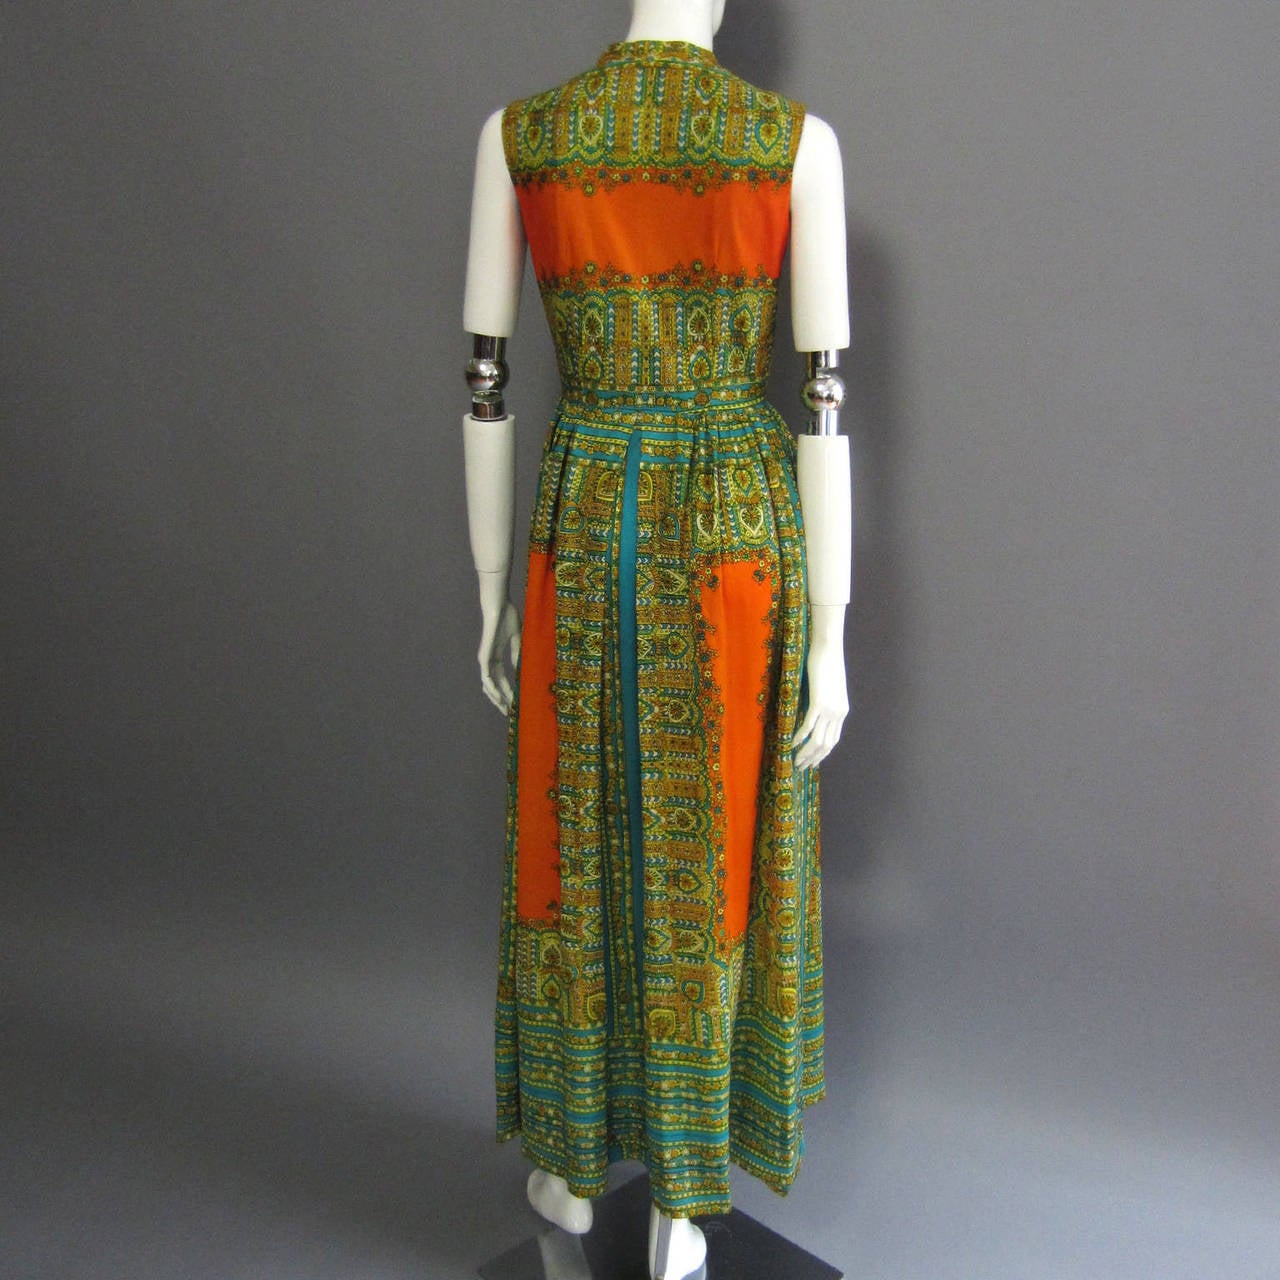 1970s TONI TODD Printed Boho Maxi Dress In Excellent Condition For Sale In New York, NY